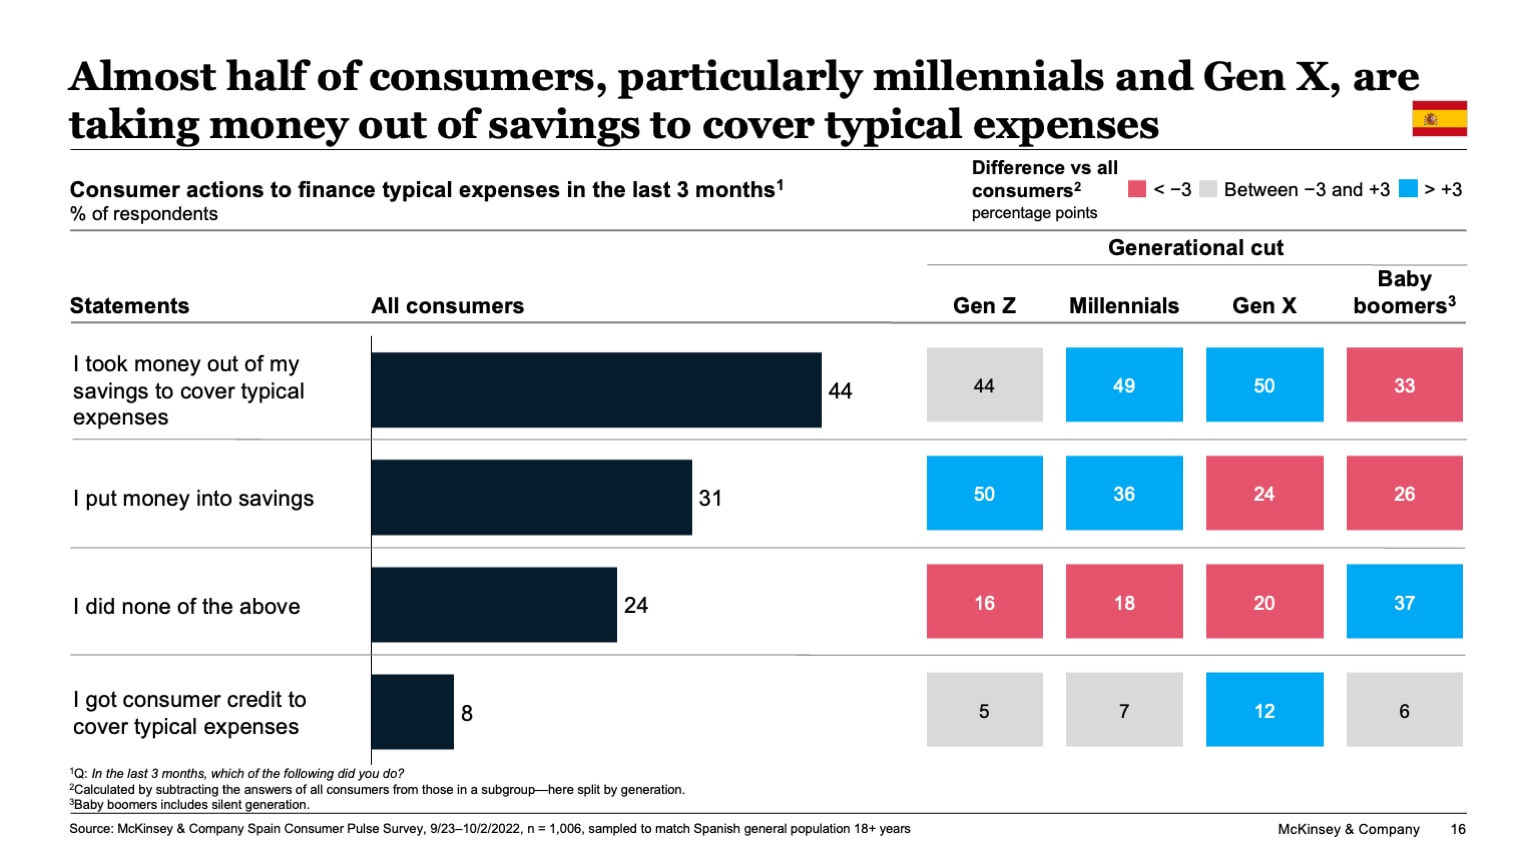 Almost half of consumers, particularly millennials and Gen X, are taking money out of savings to cover typical expenses